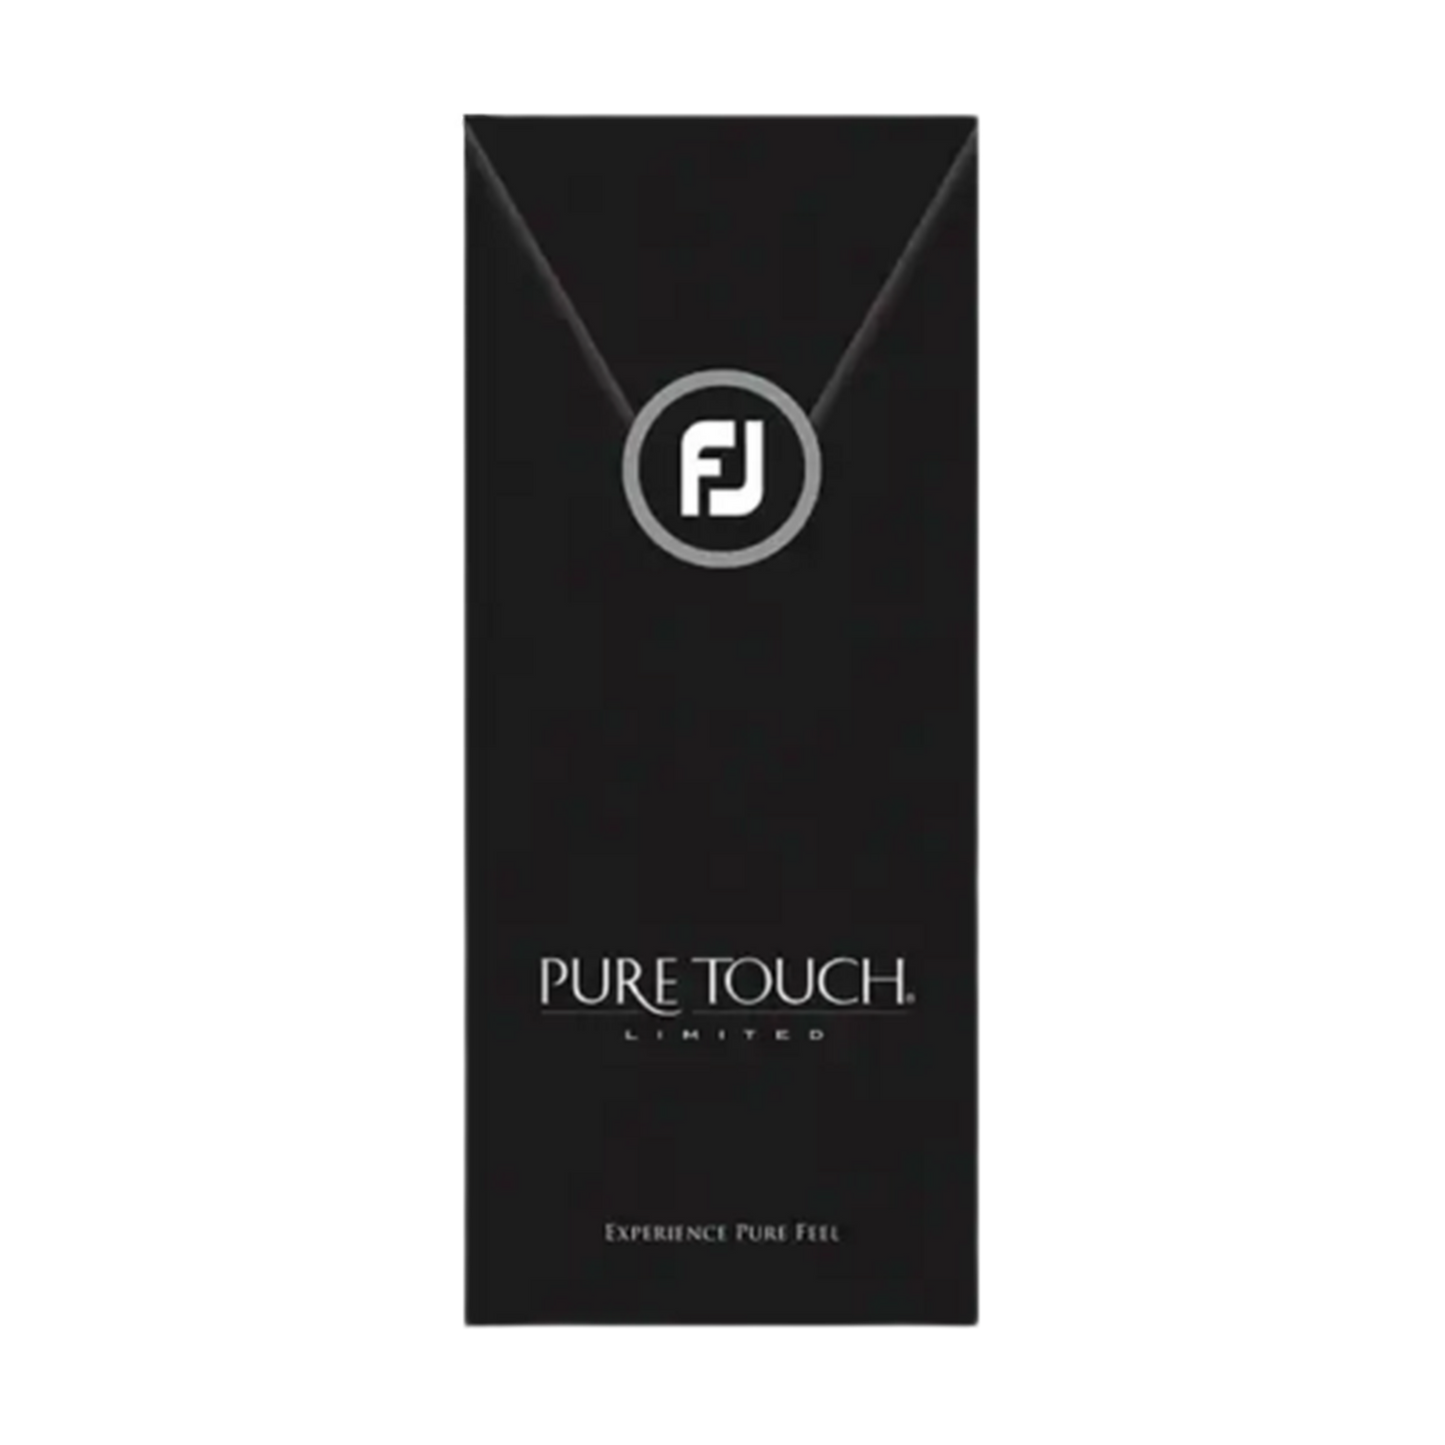 Pure Touch Limited